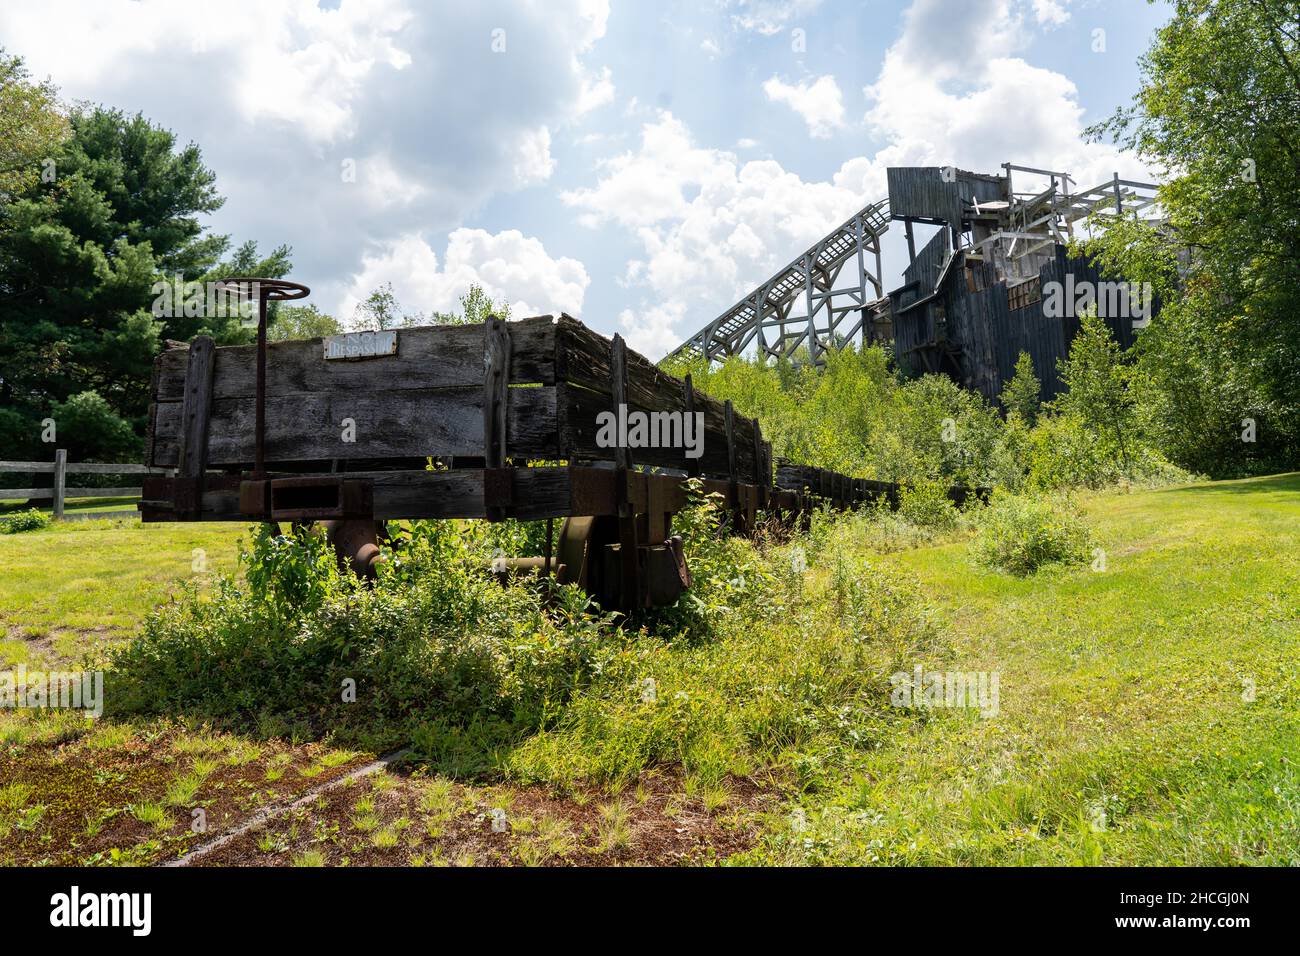 A historic coal breaker with a dilapidated rail car in the foreground in selctive focus. Stock Photo